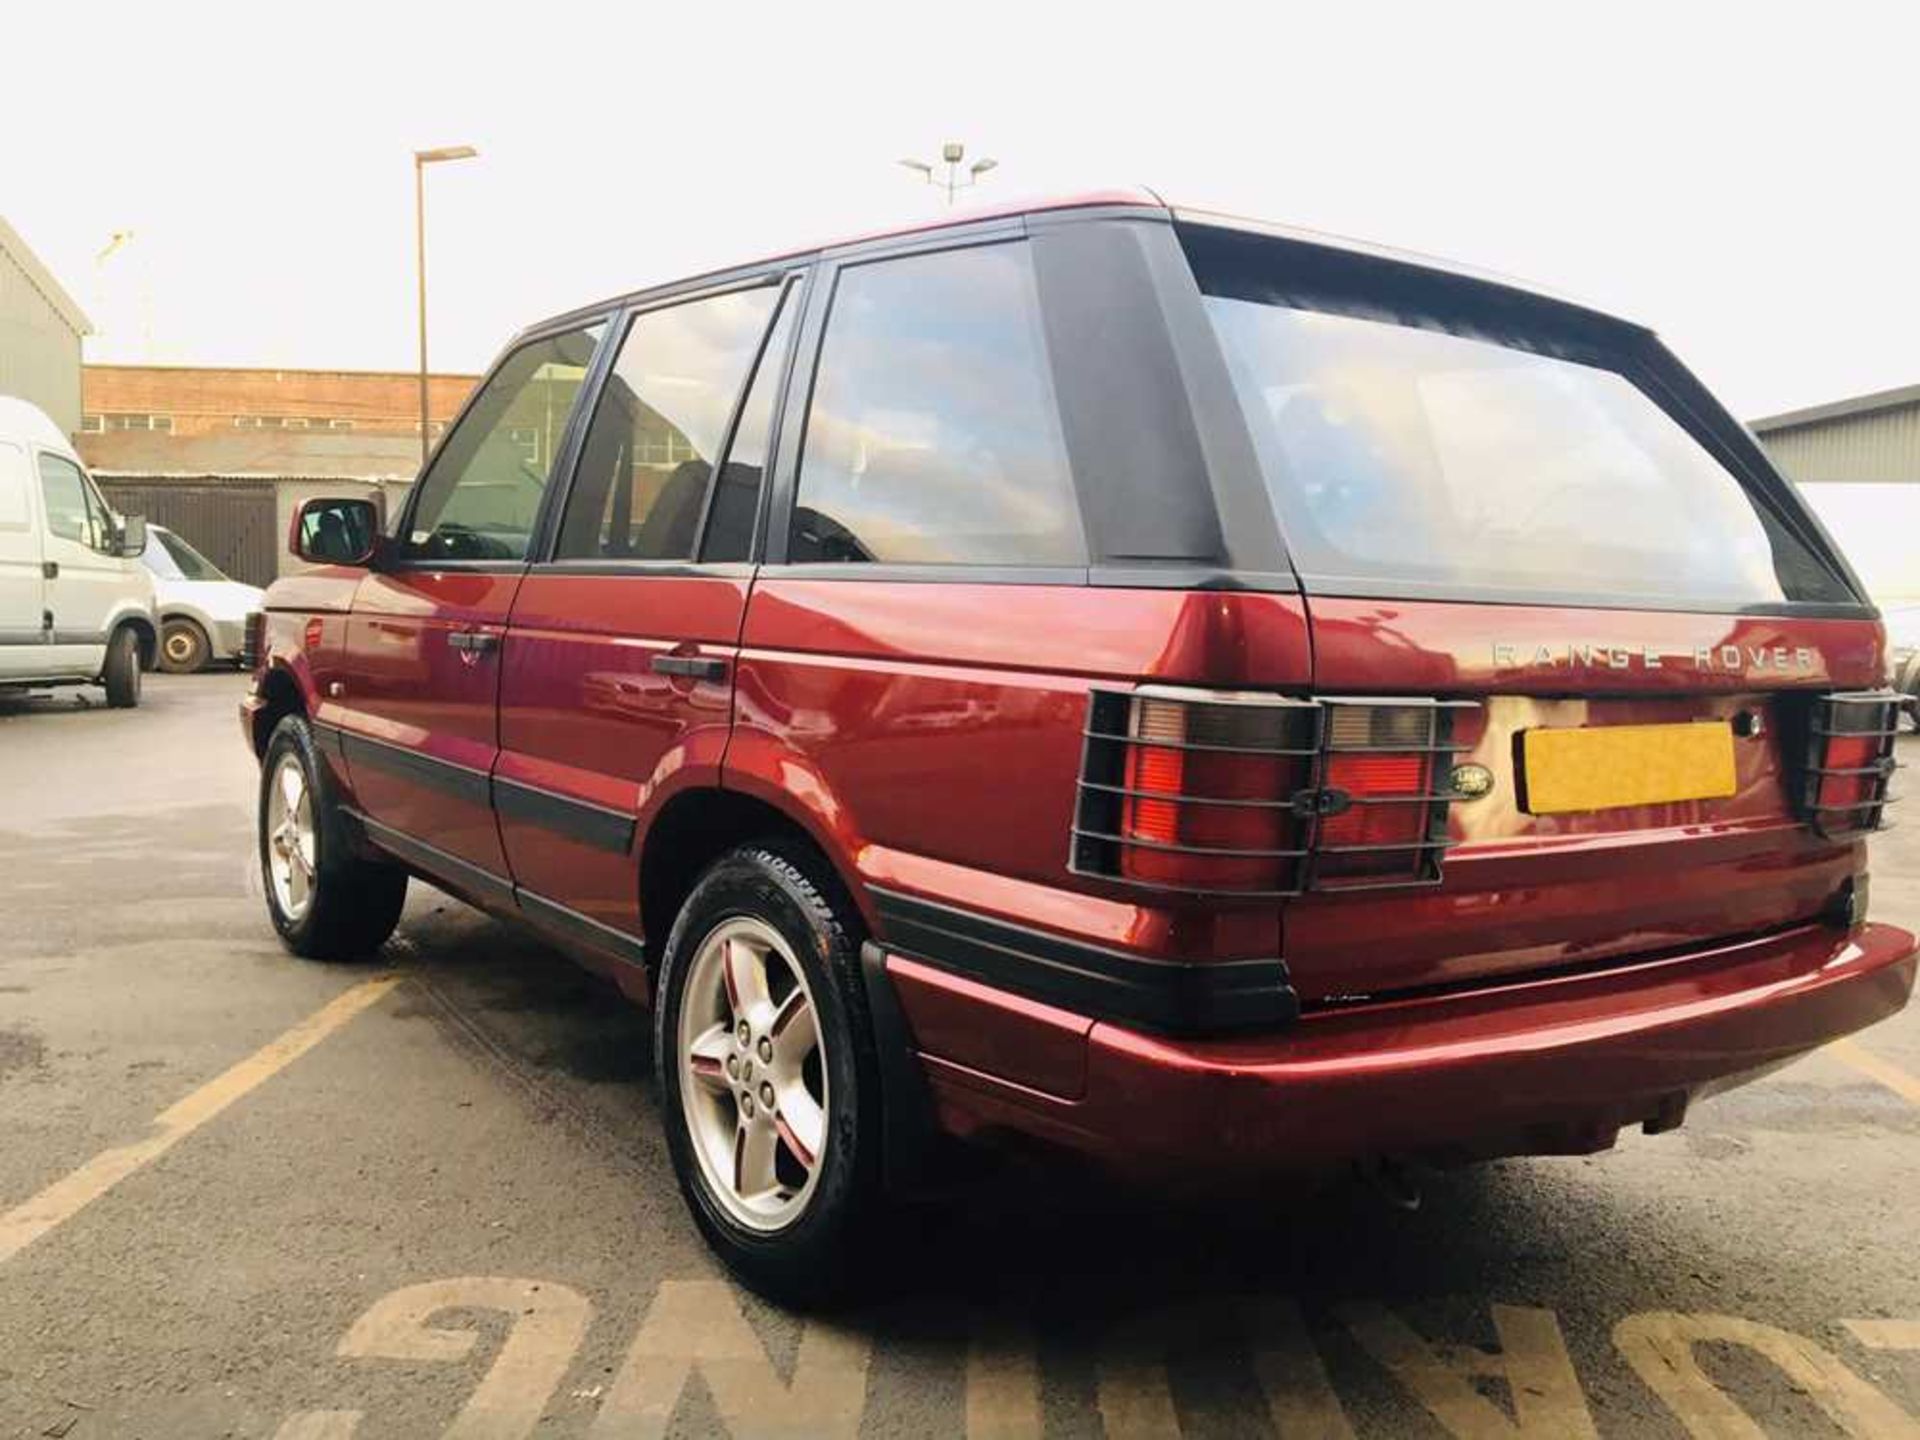 2001 Range Rover 2.5 TD Bordeaux One of just 200 UK-supplied limited edition 'Bordeaux' examples - Image 4 of 20